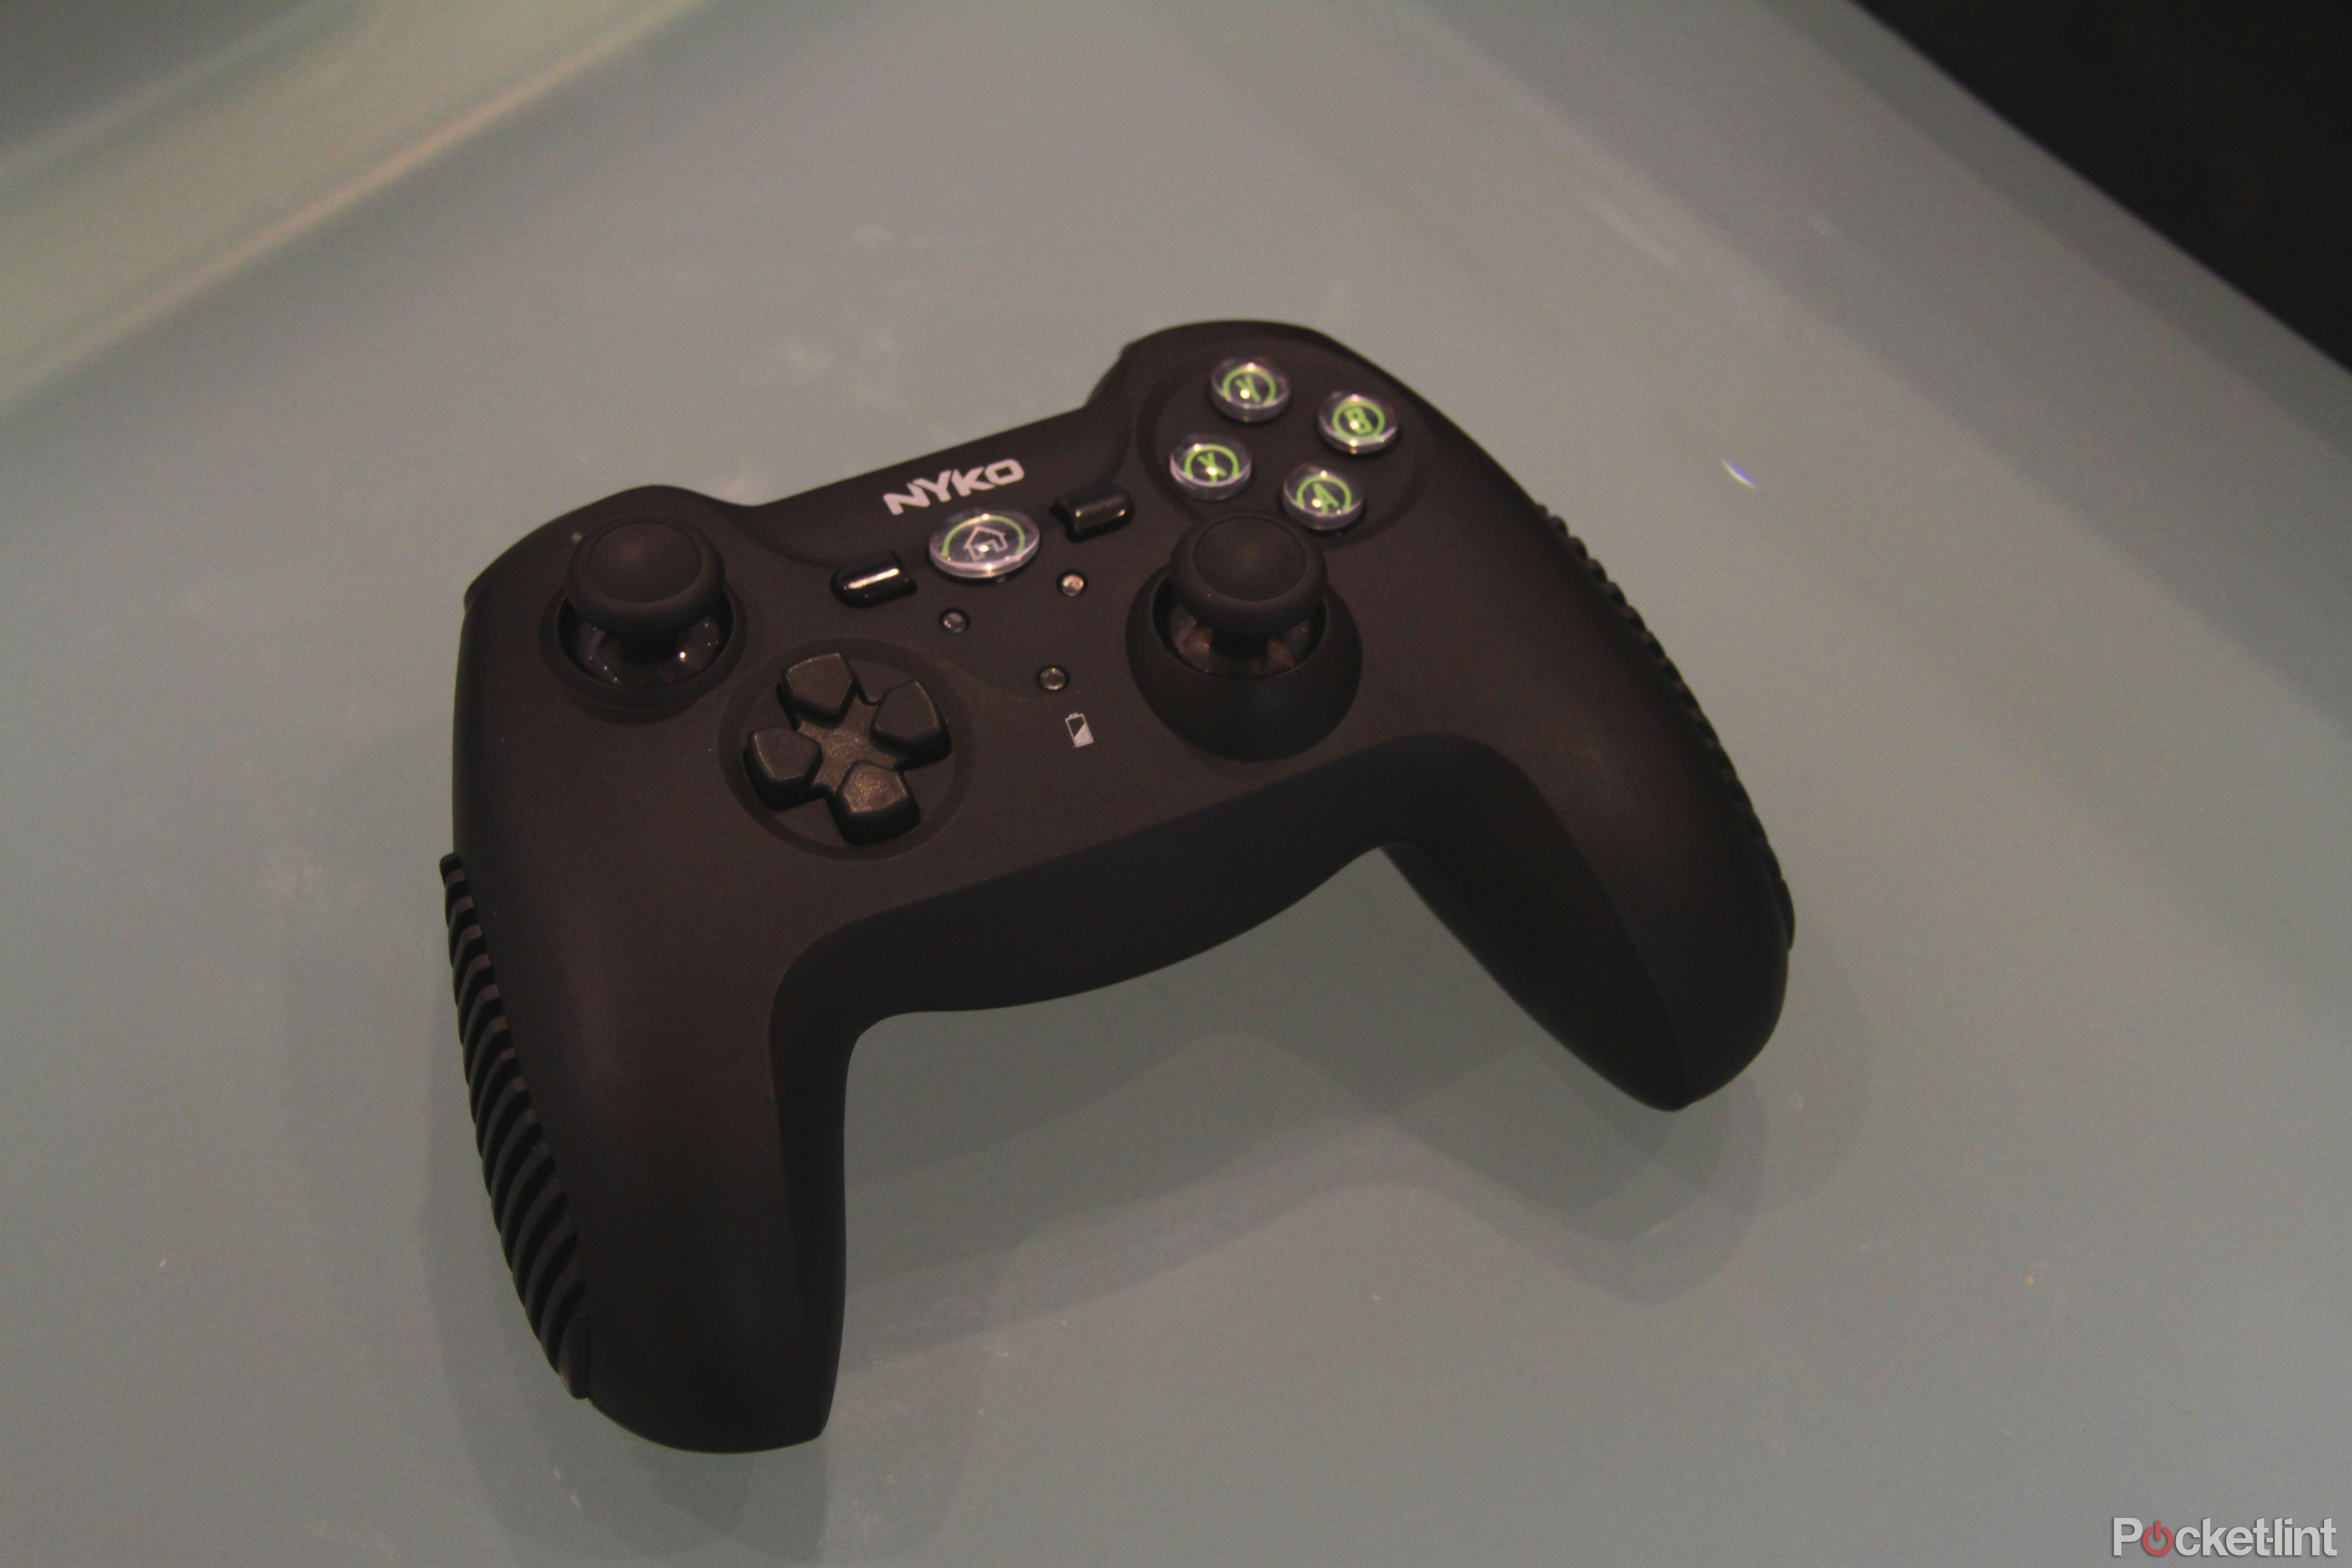 nyko has xbox one gamers covered with its new data bank enclosure type pad keyboard and more hands on image 3